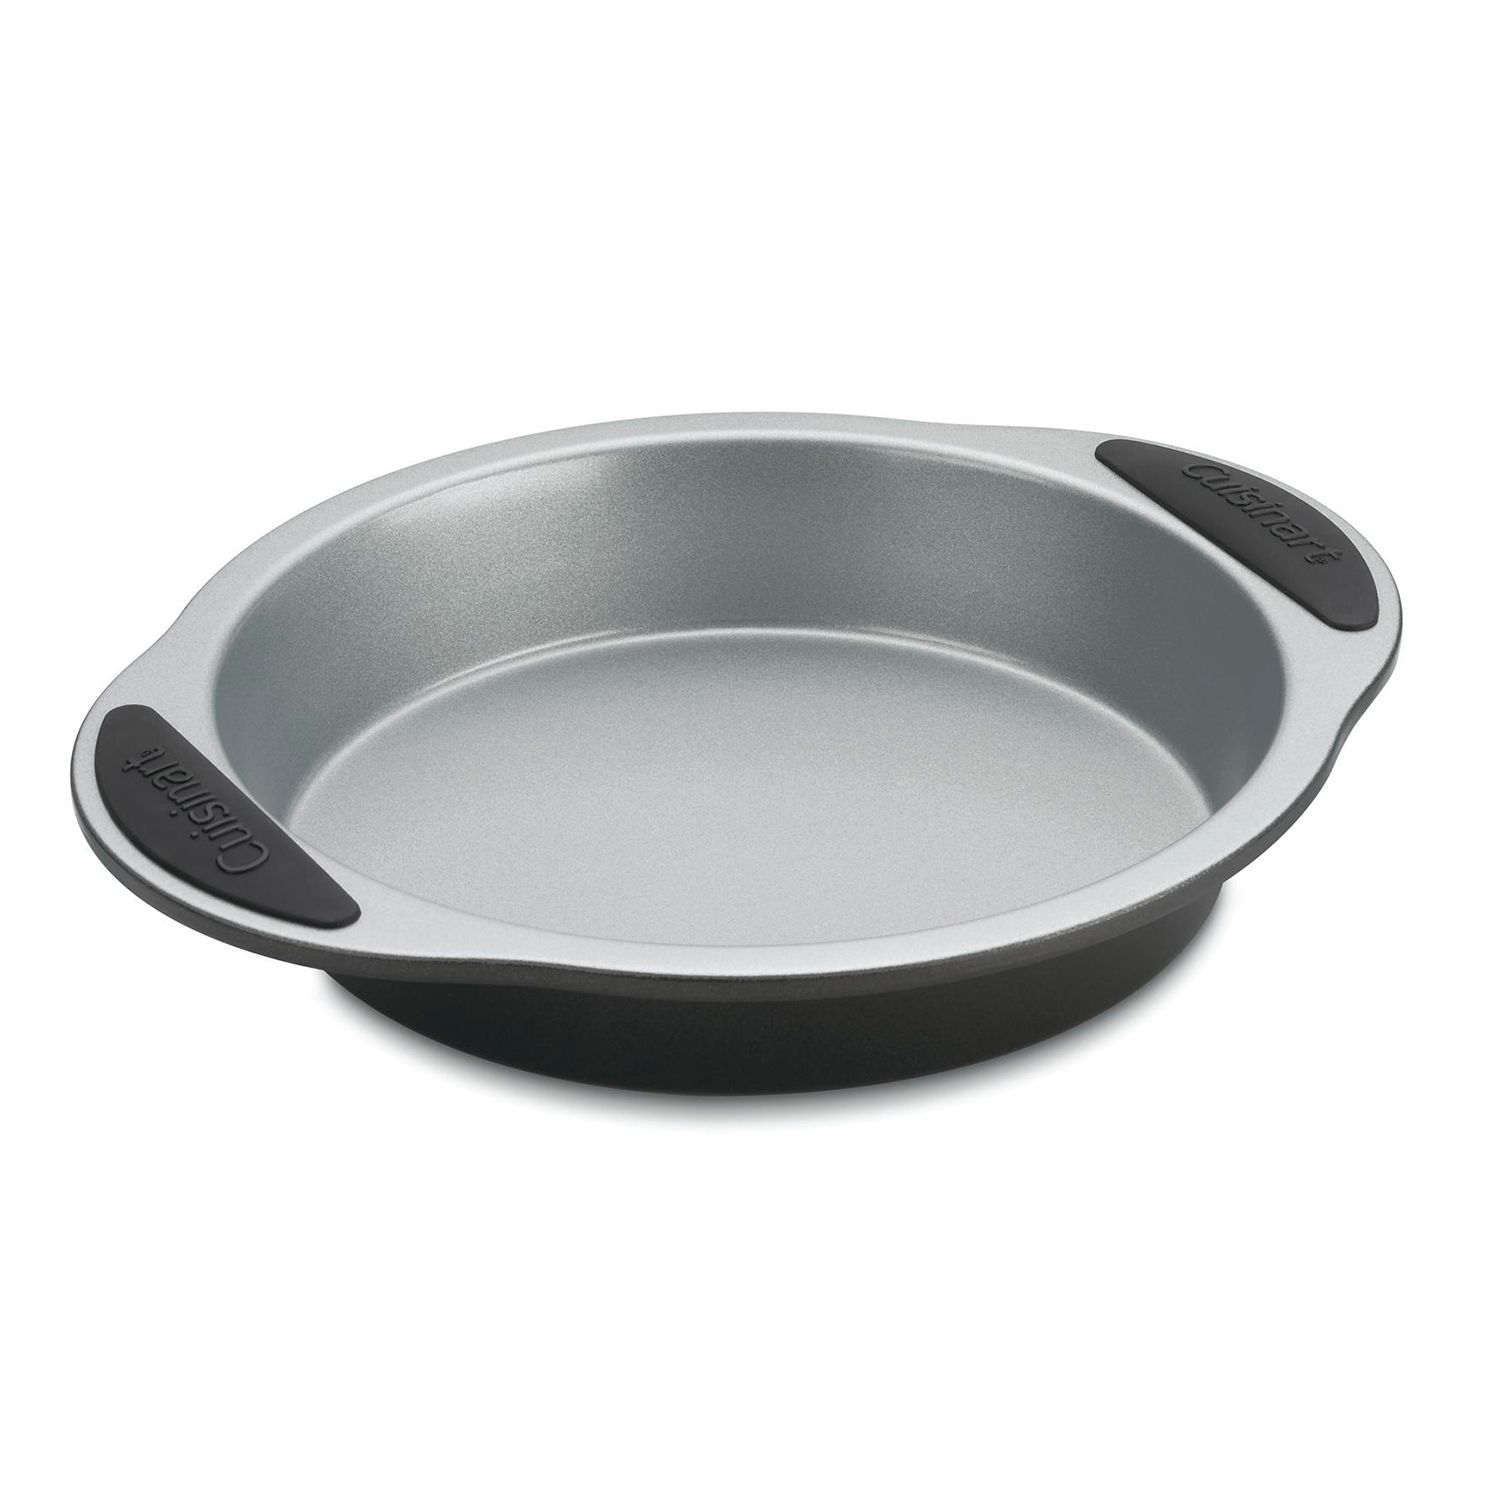 Save on ChefSelect Springform Pan Non-Stick 9 Inch Order Online Delivery